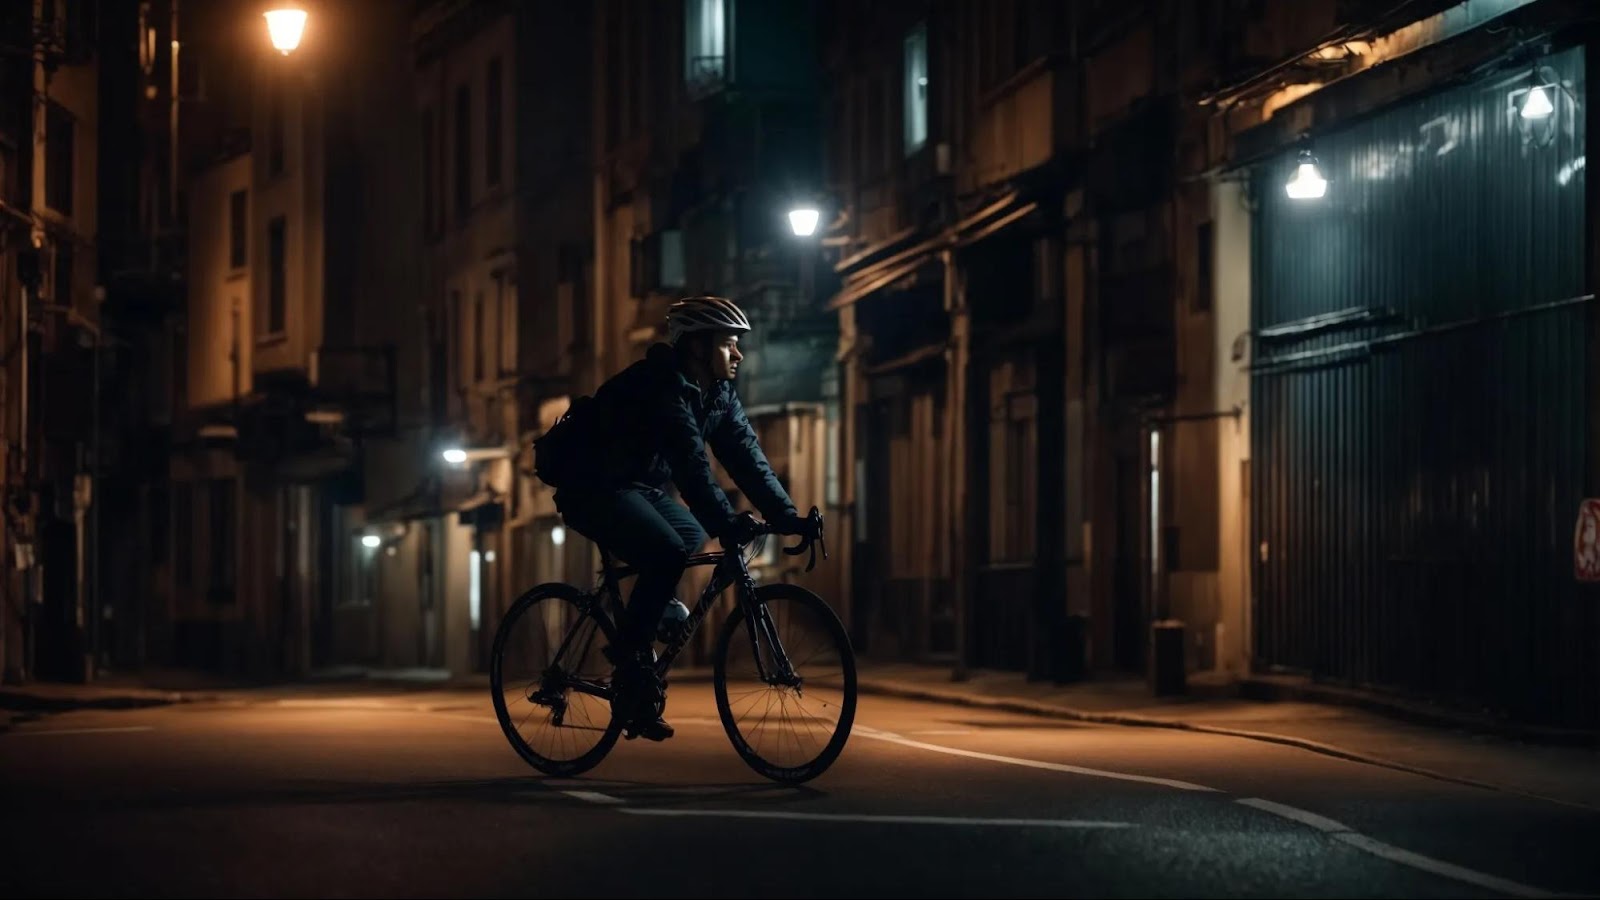 a cyclist moves through a dimly lit urban street, lacking any visible lights or reflective gear, blending into the shadowy backdrop of the nighttime city.